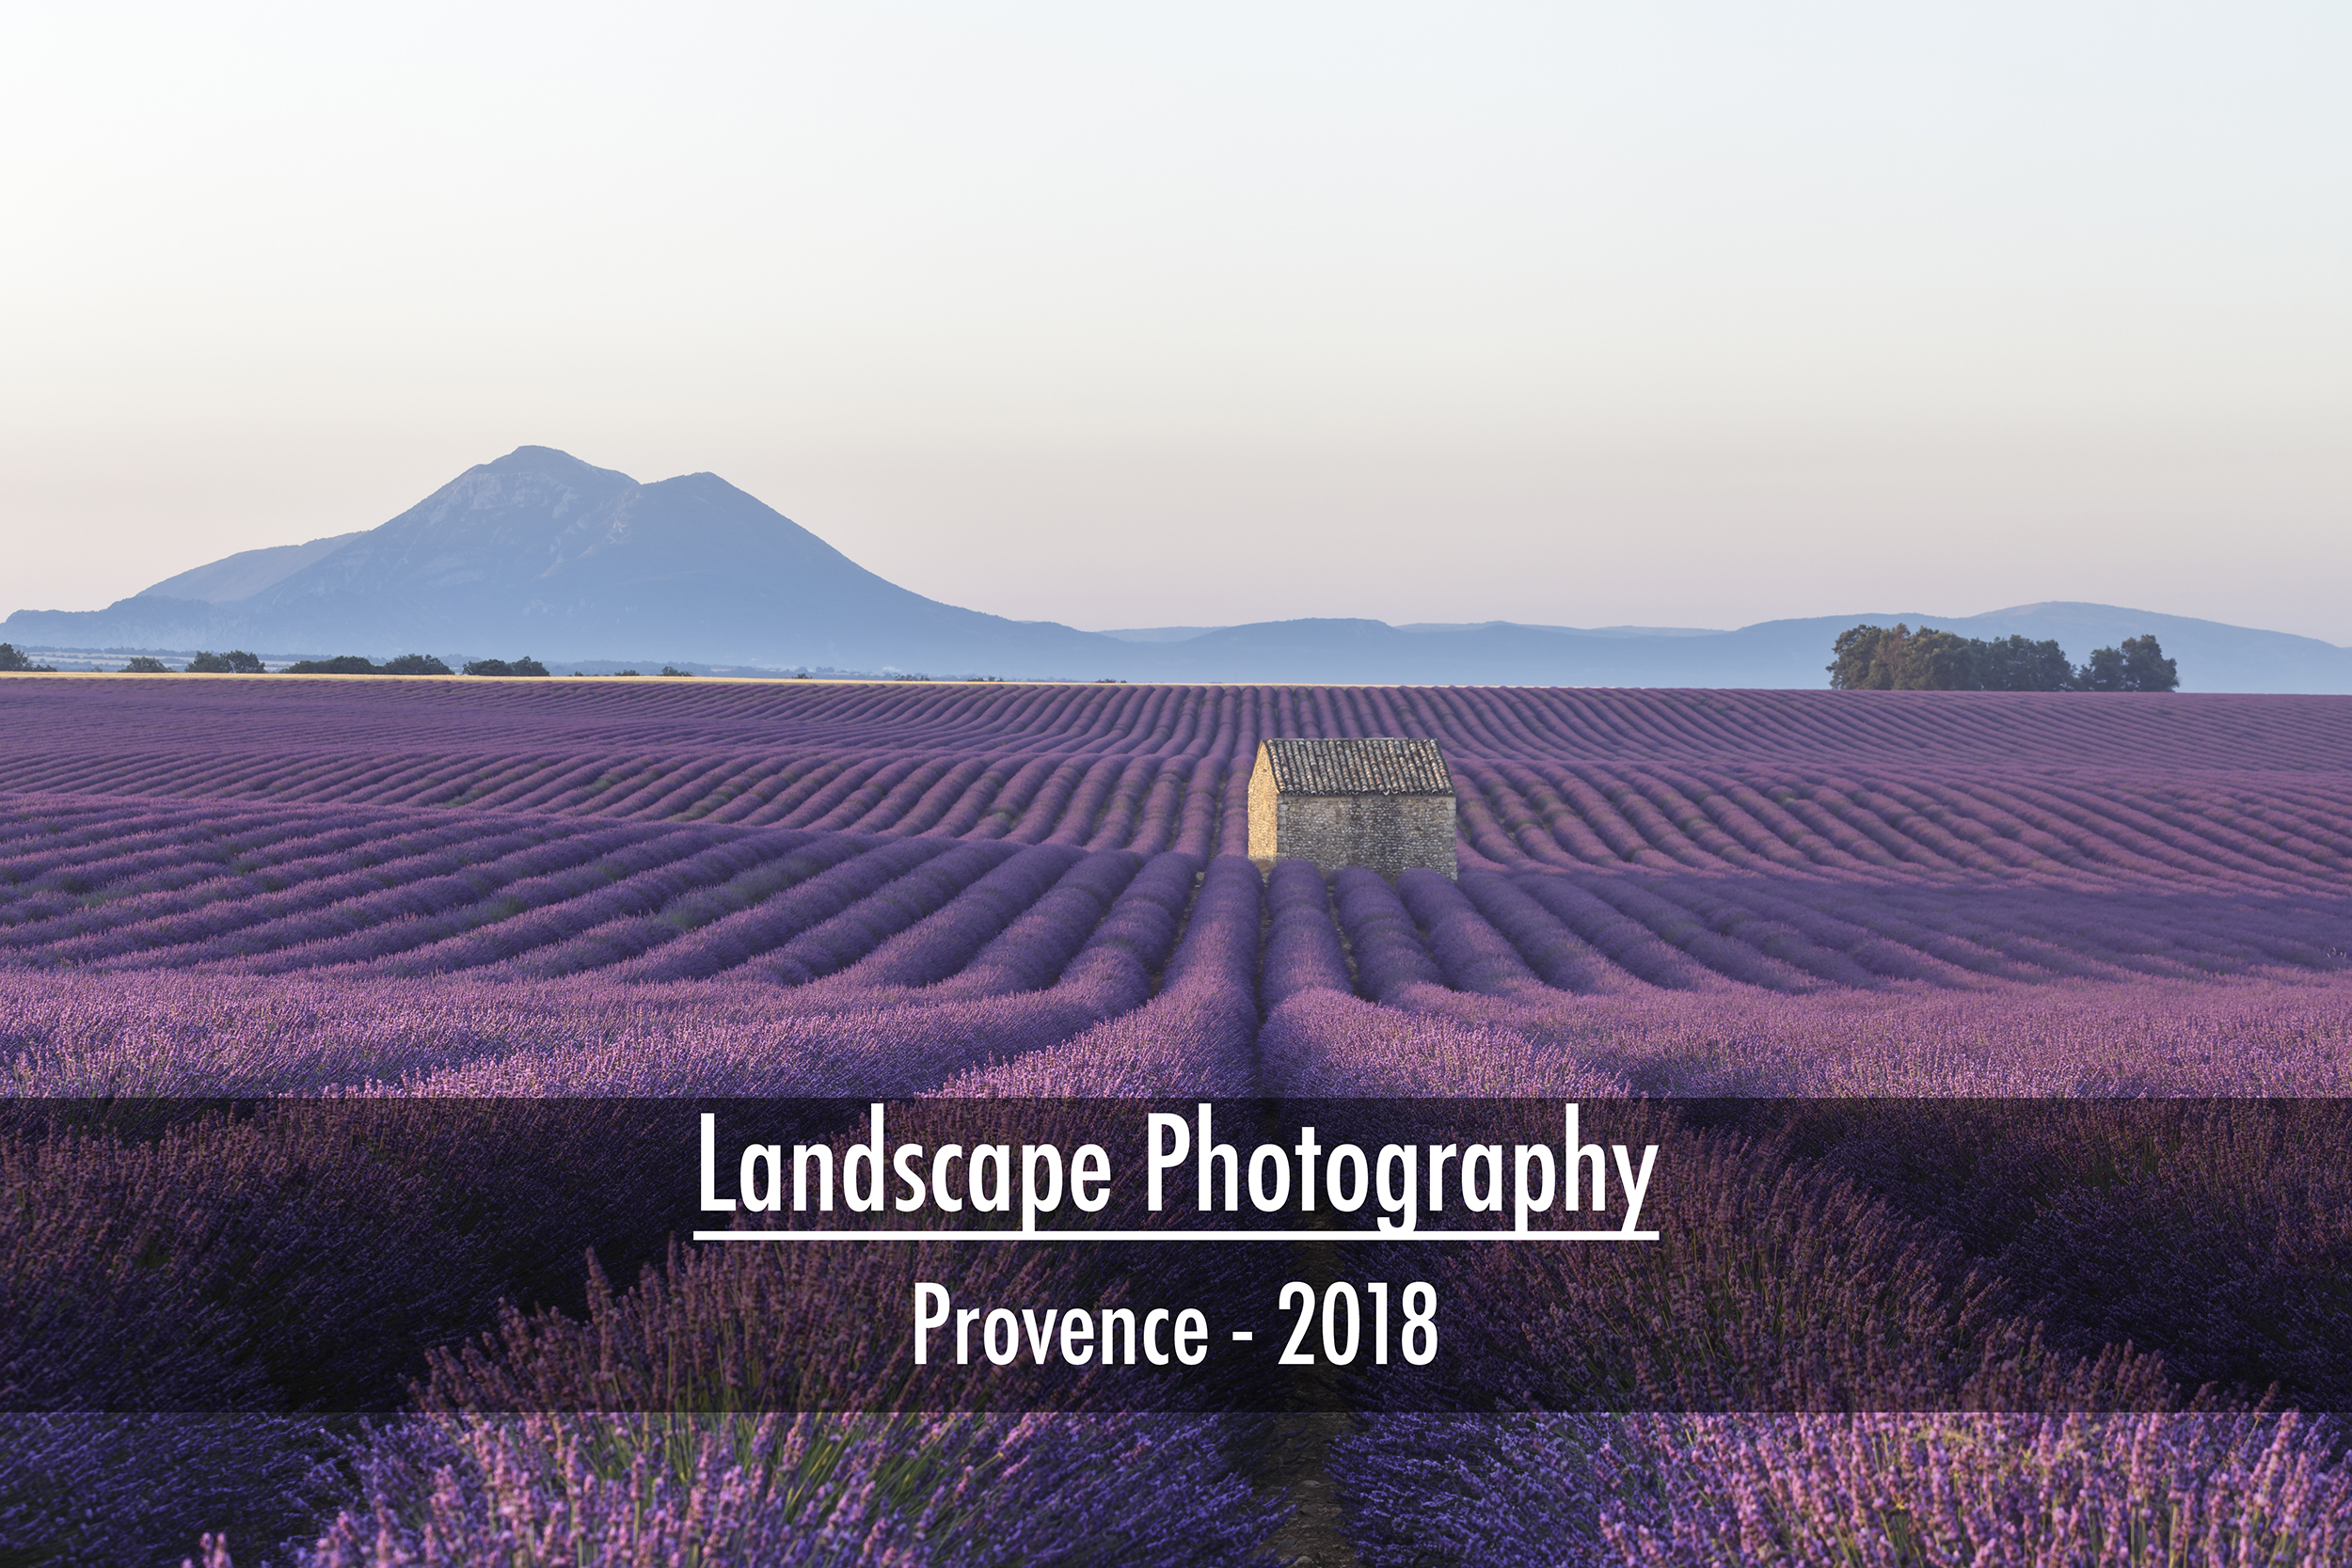 Landscape photography in Provence. Photography tour and workshop.